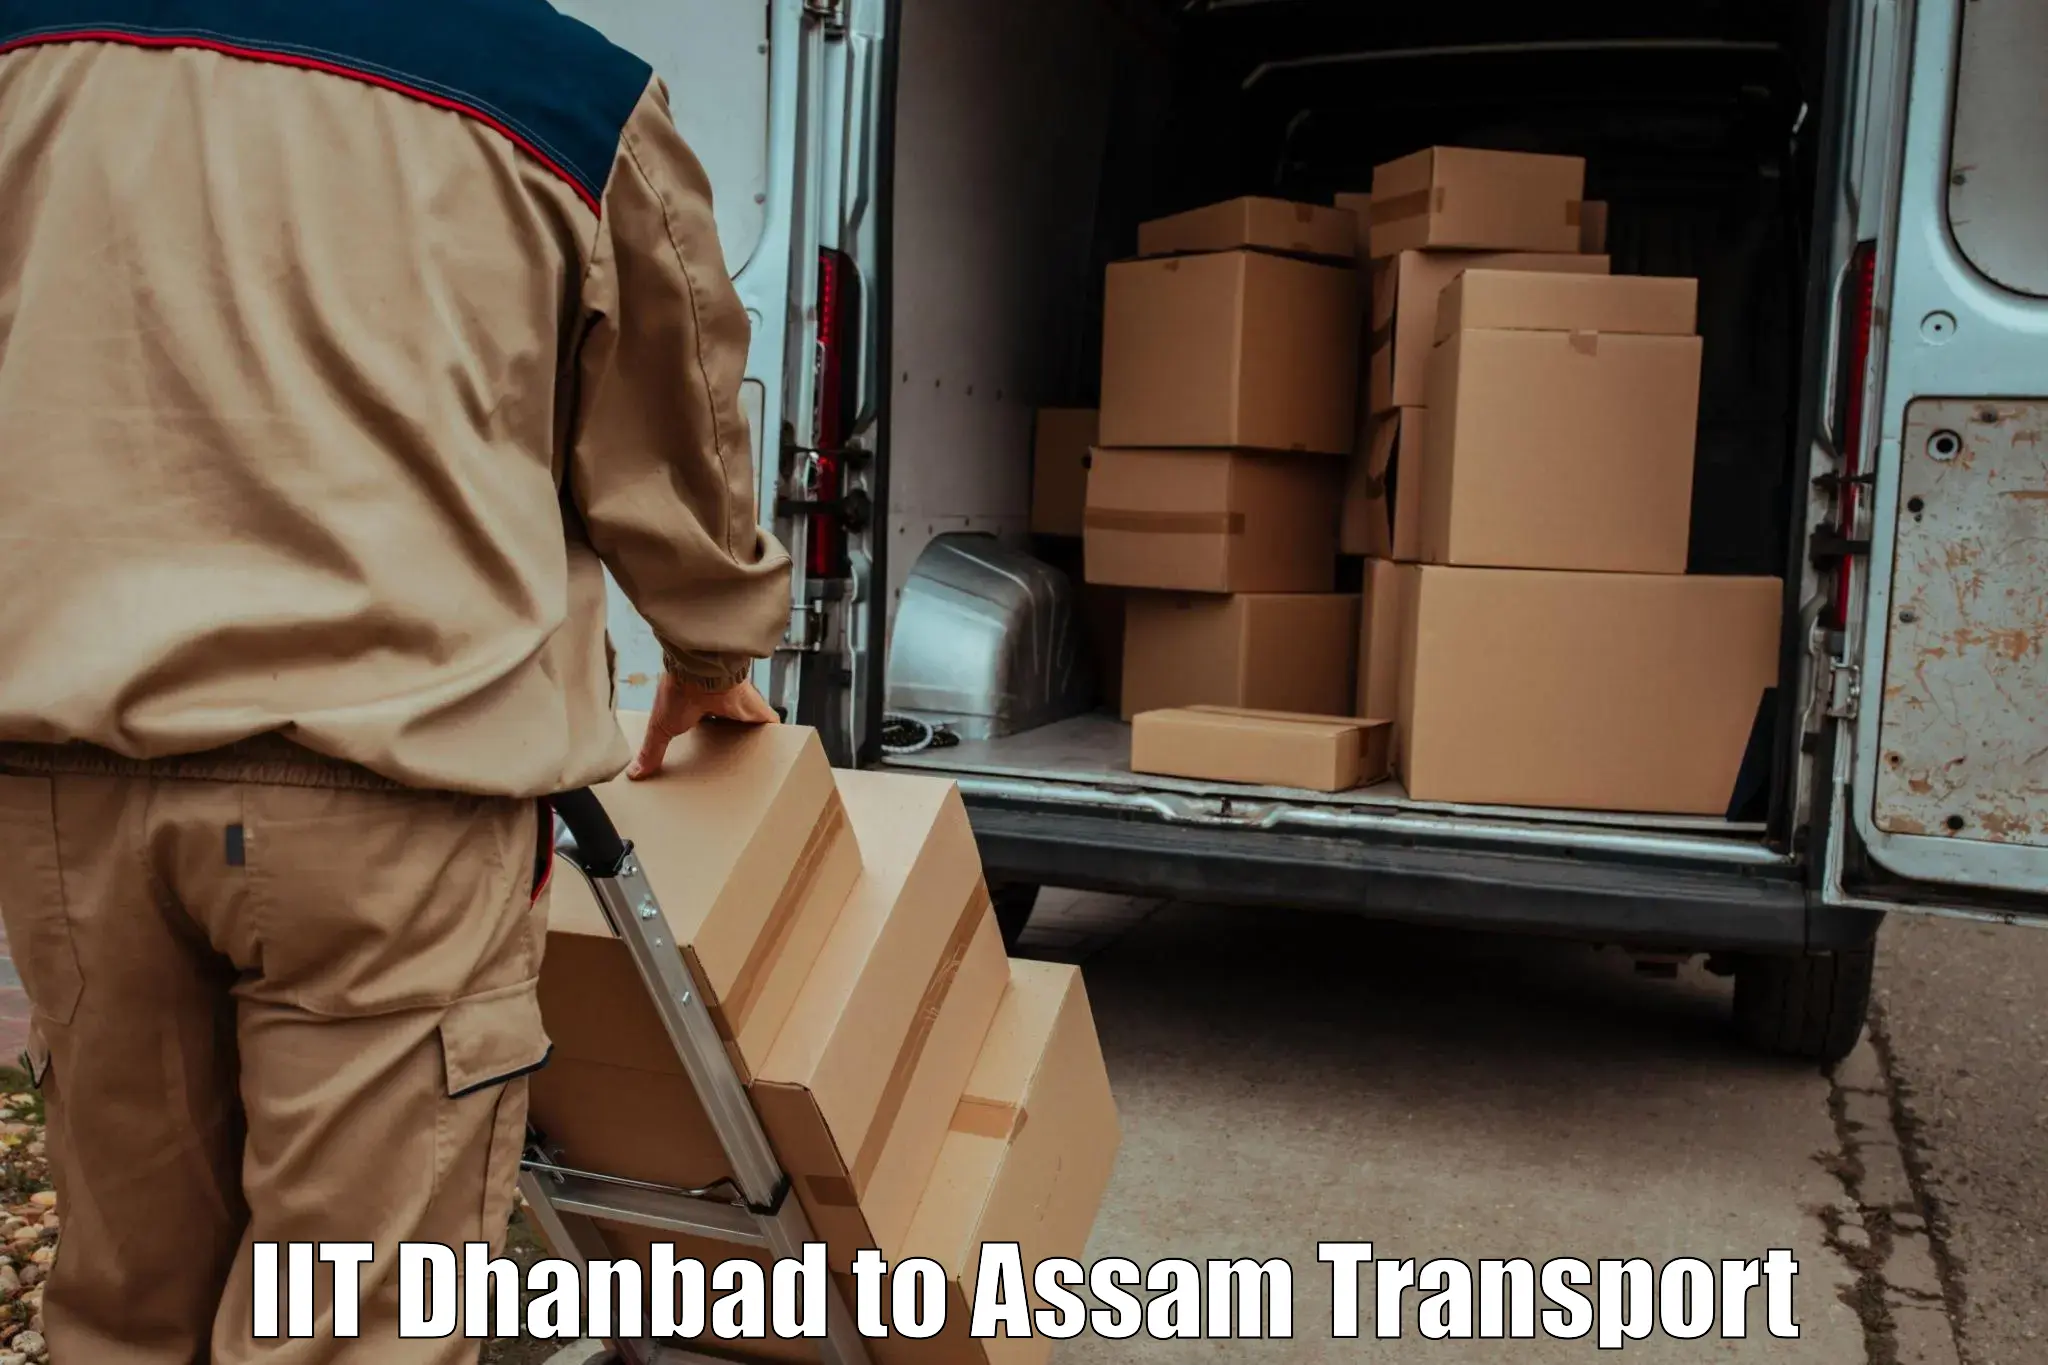 Pick up transport service IIT Dhanbad to Noonmati